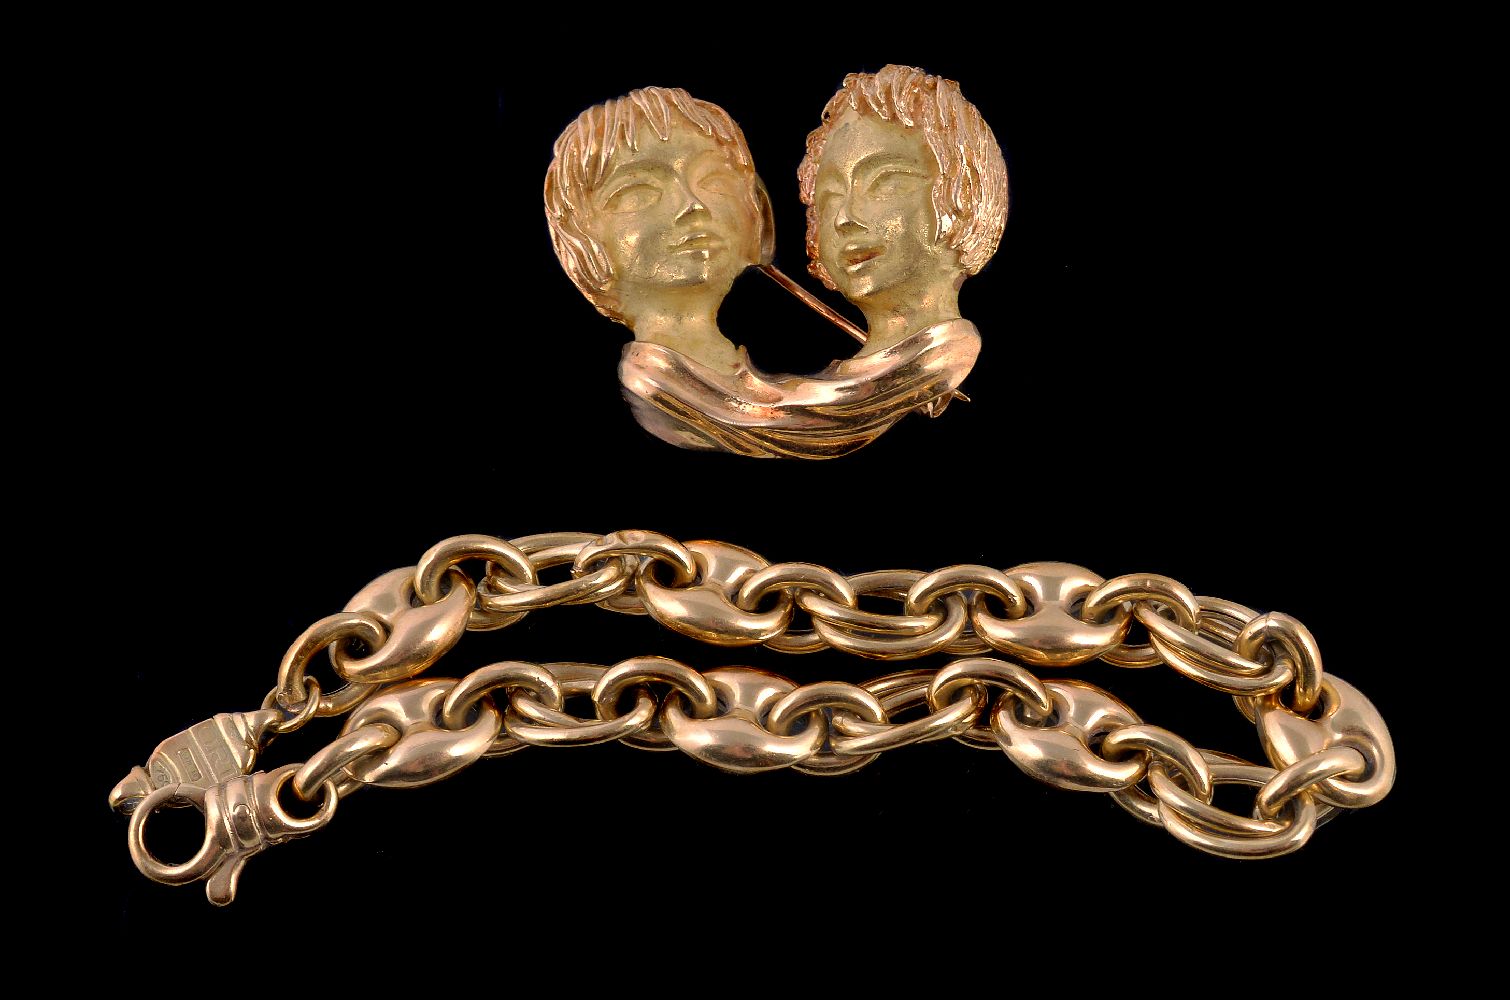 A novelty gold coloured brooch, cast as the profiles of two conversing people, with textured hair,